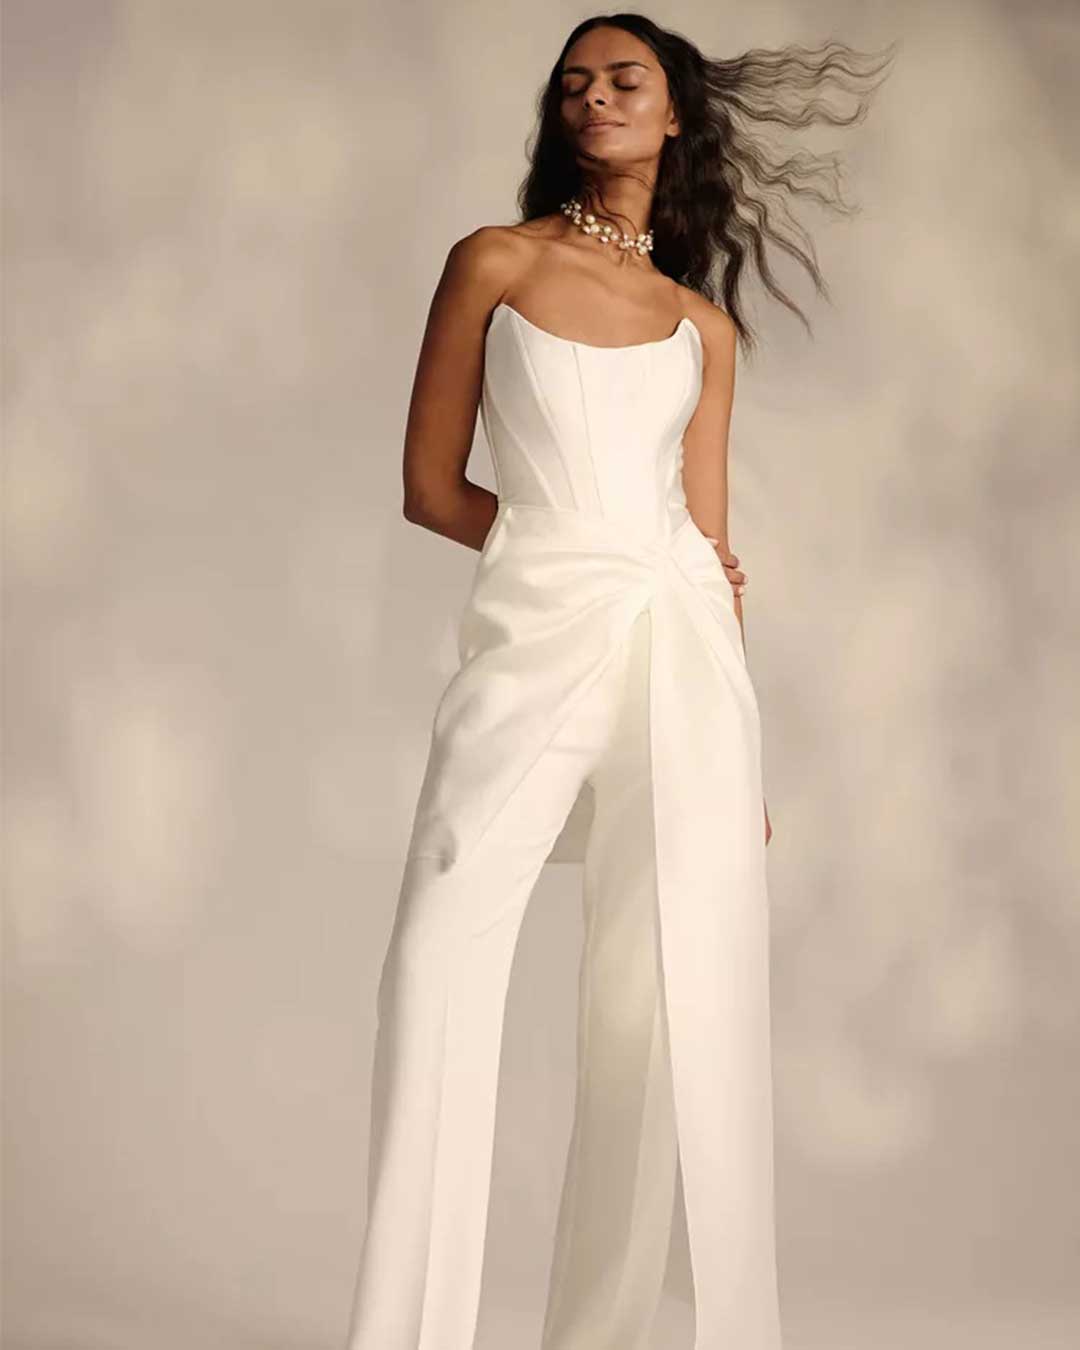 Simple Wedding Dresses That Prove Less is More